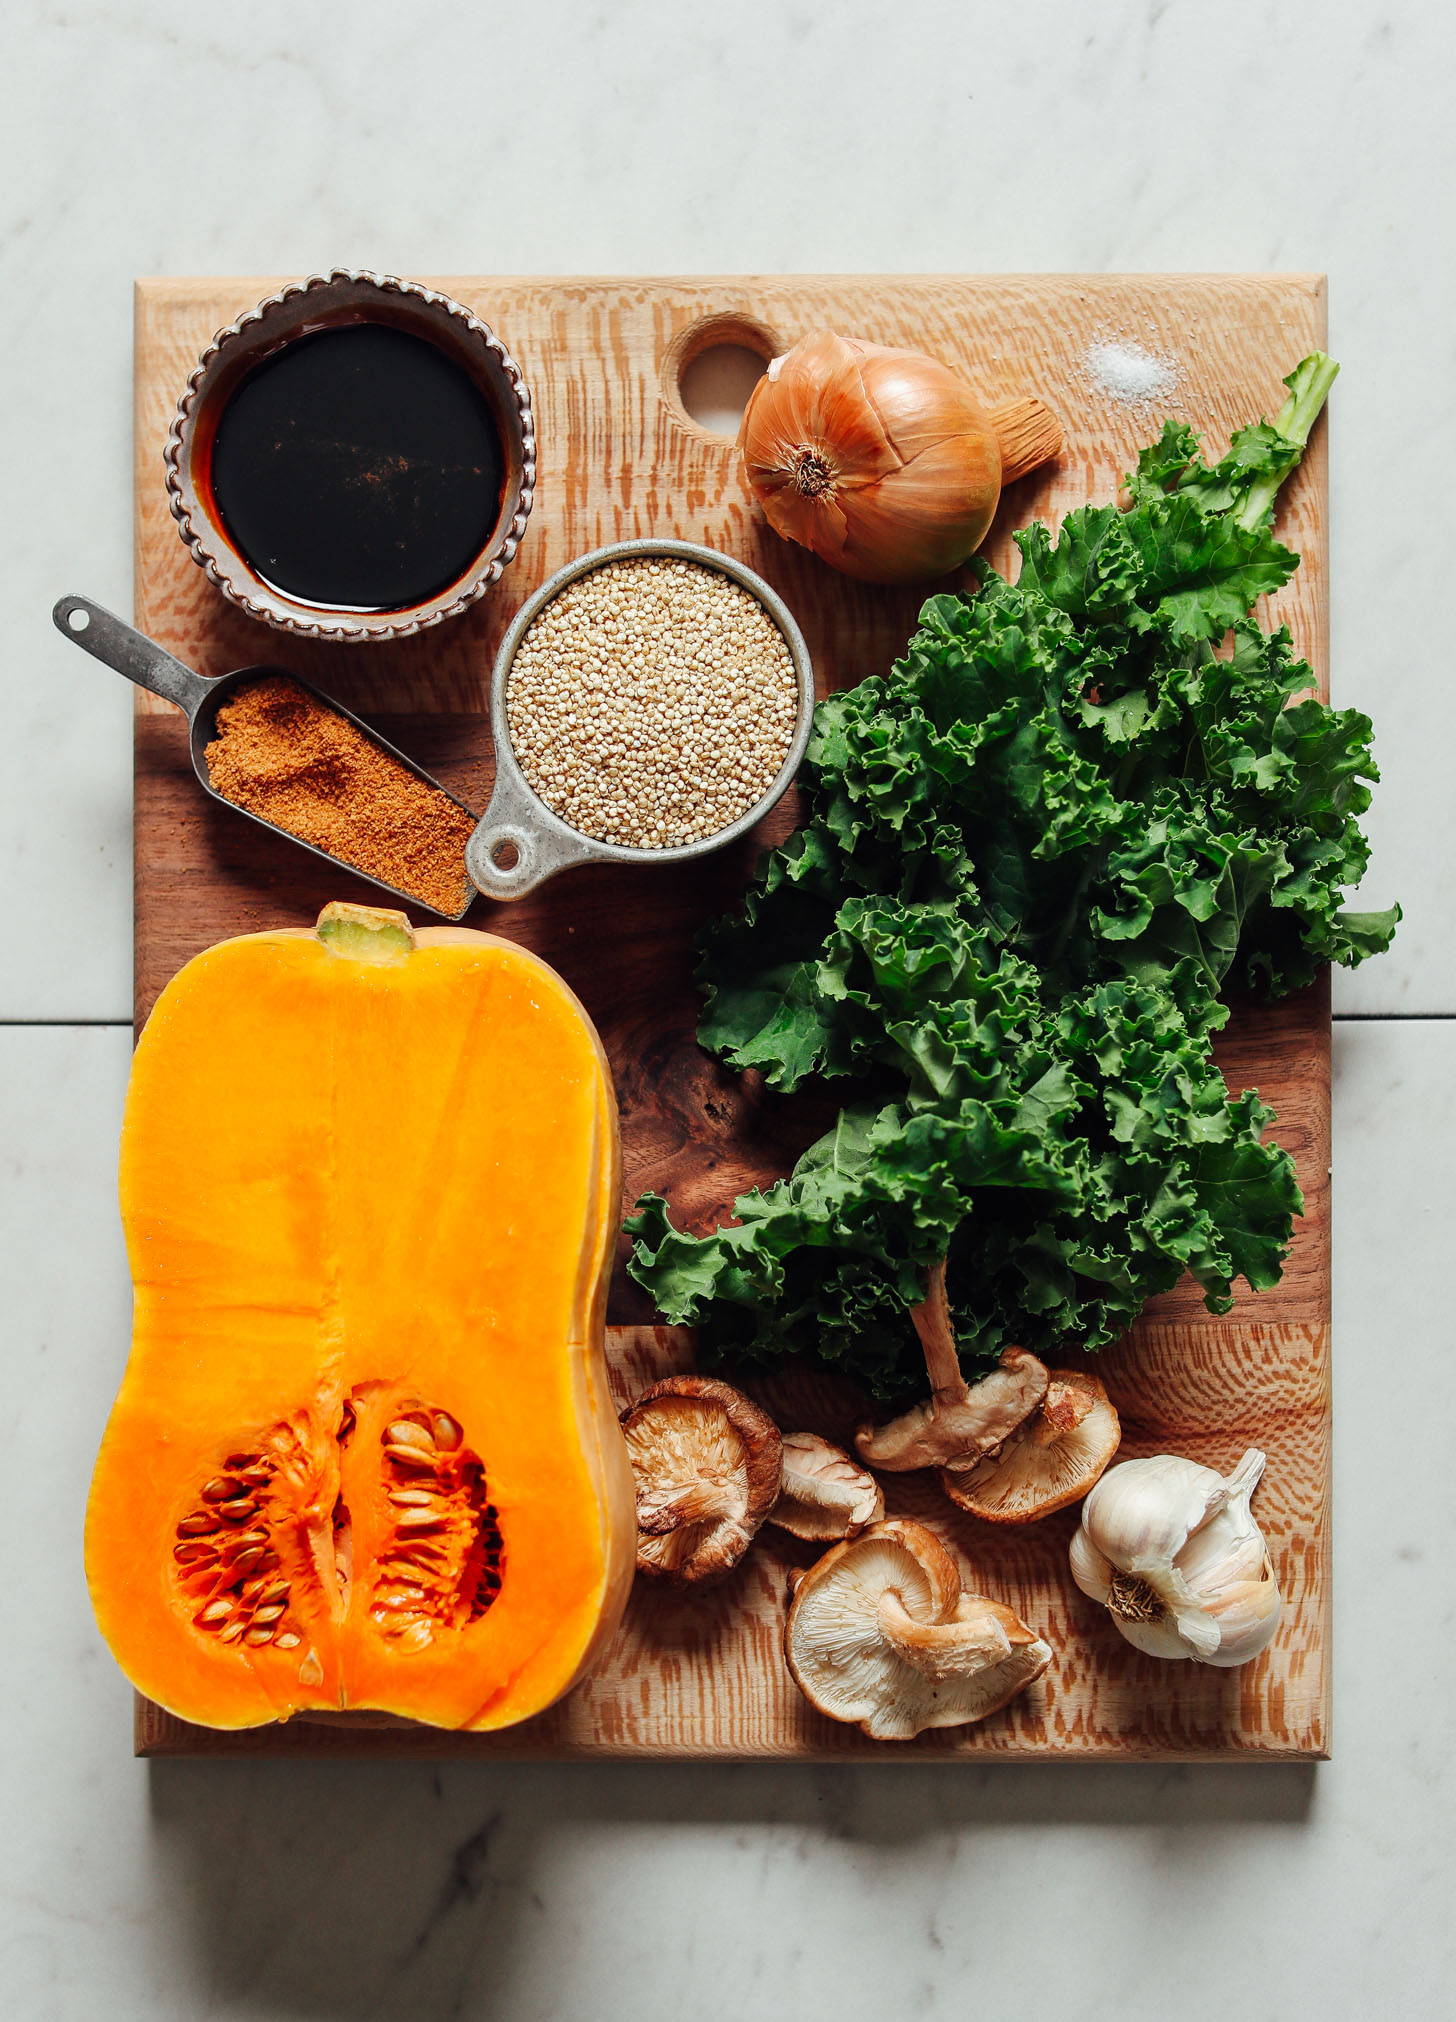 Cutting board with ingredients for making holiday stuffed butternut squash